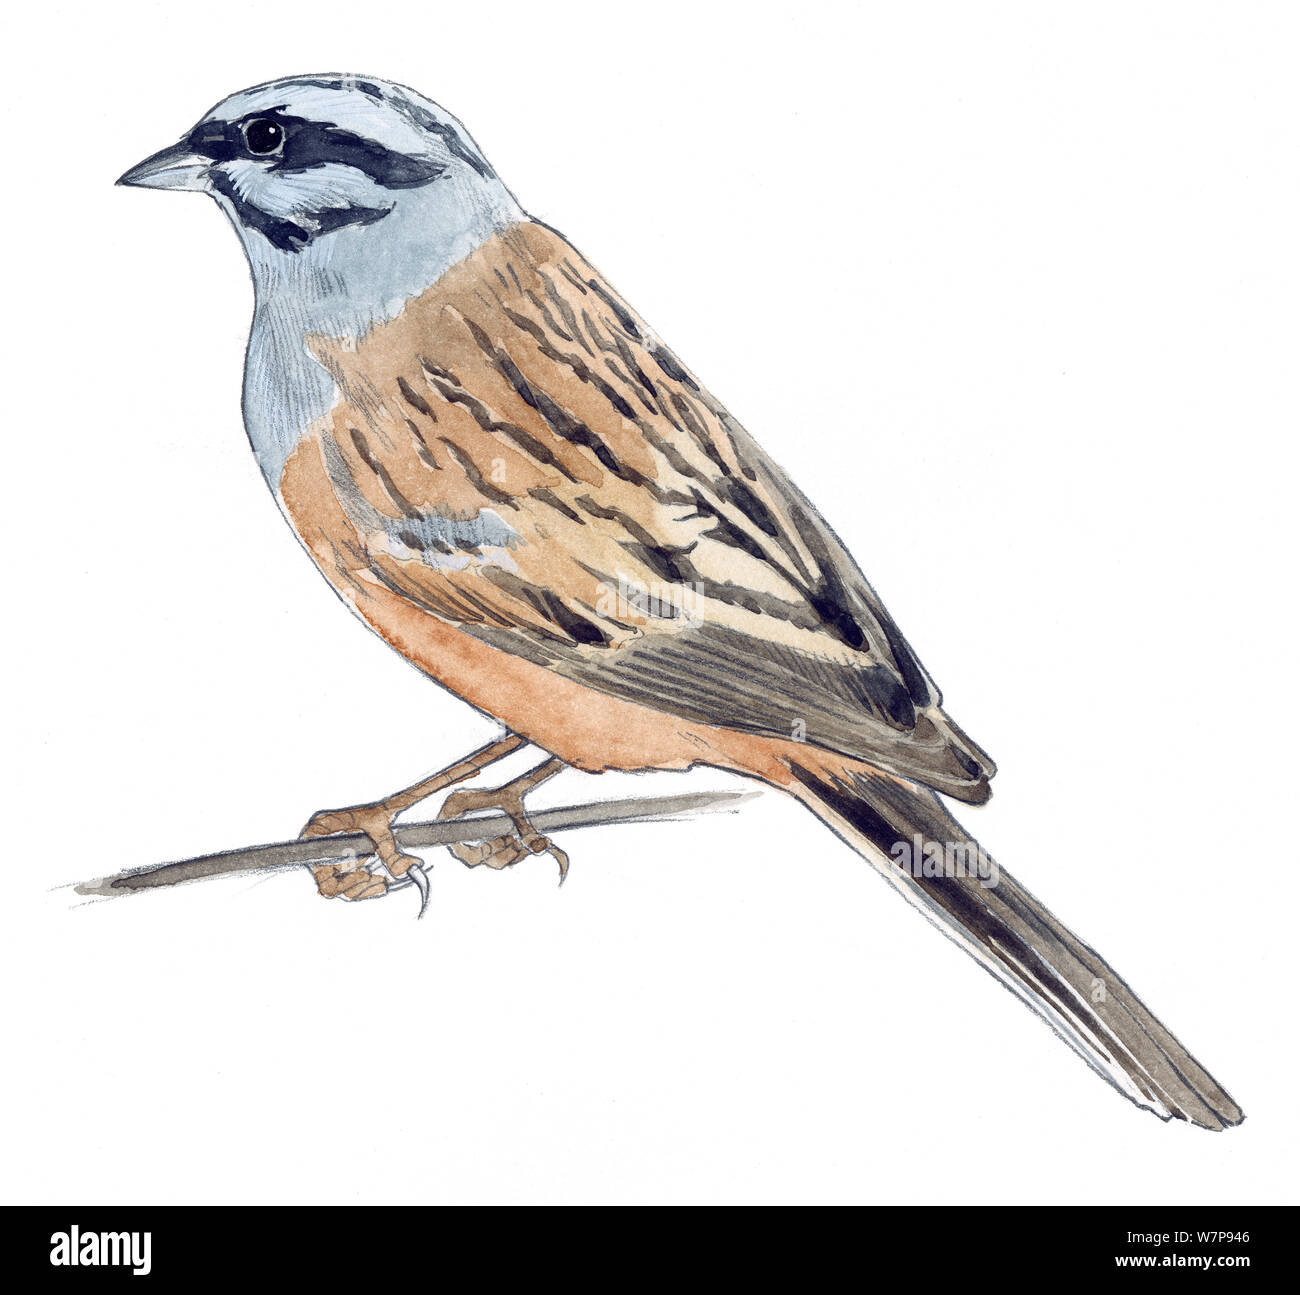 Illustration of Rock Bunting (Emberiza cia). Pencil and watercolor painting. Stock Photo